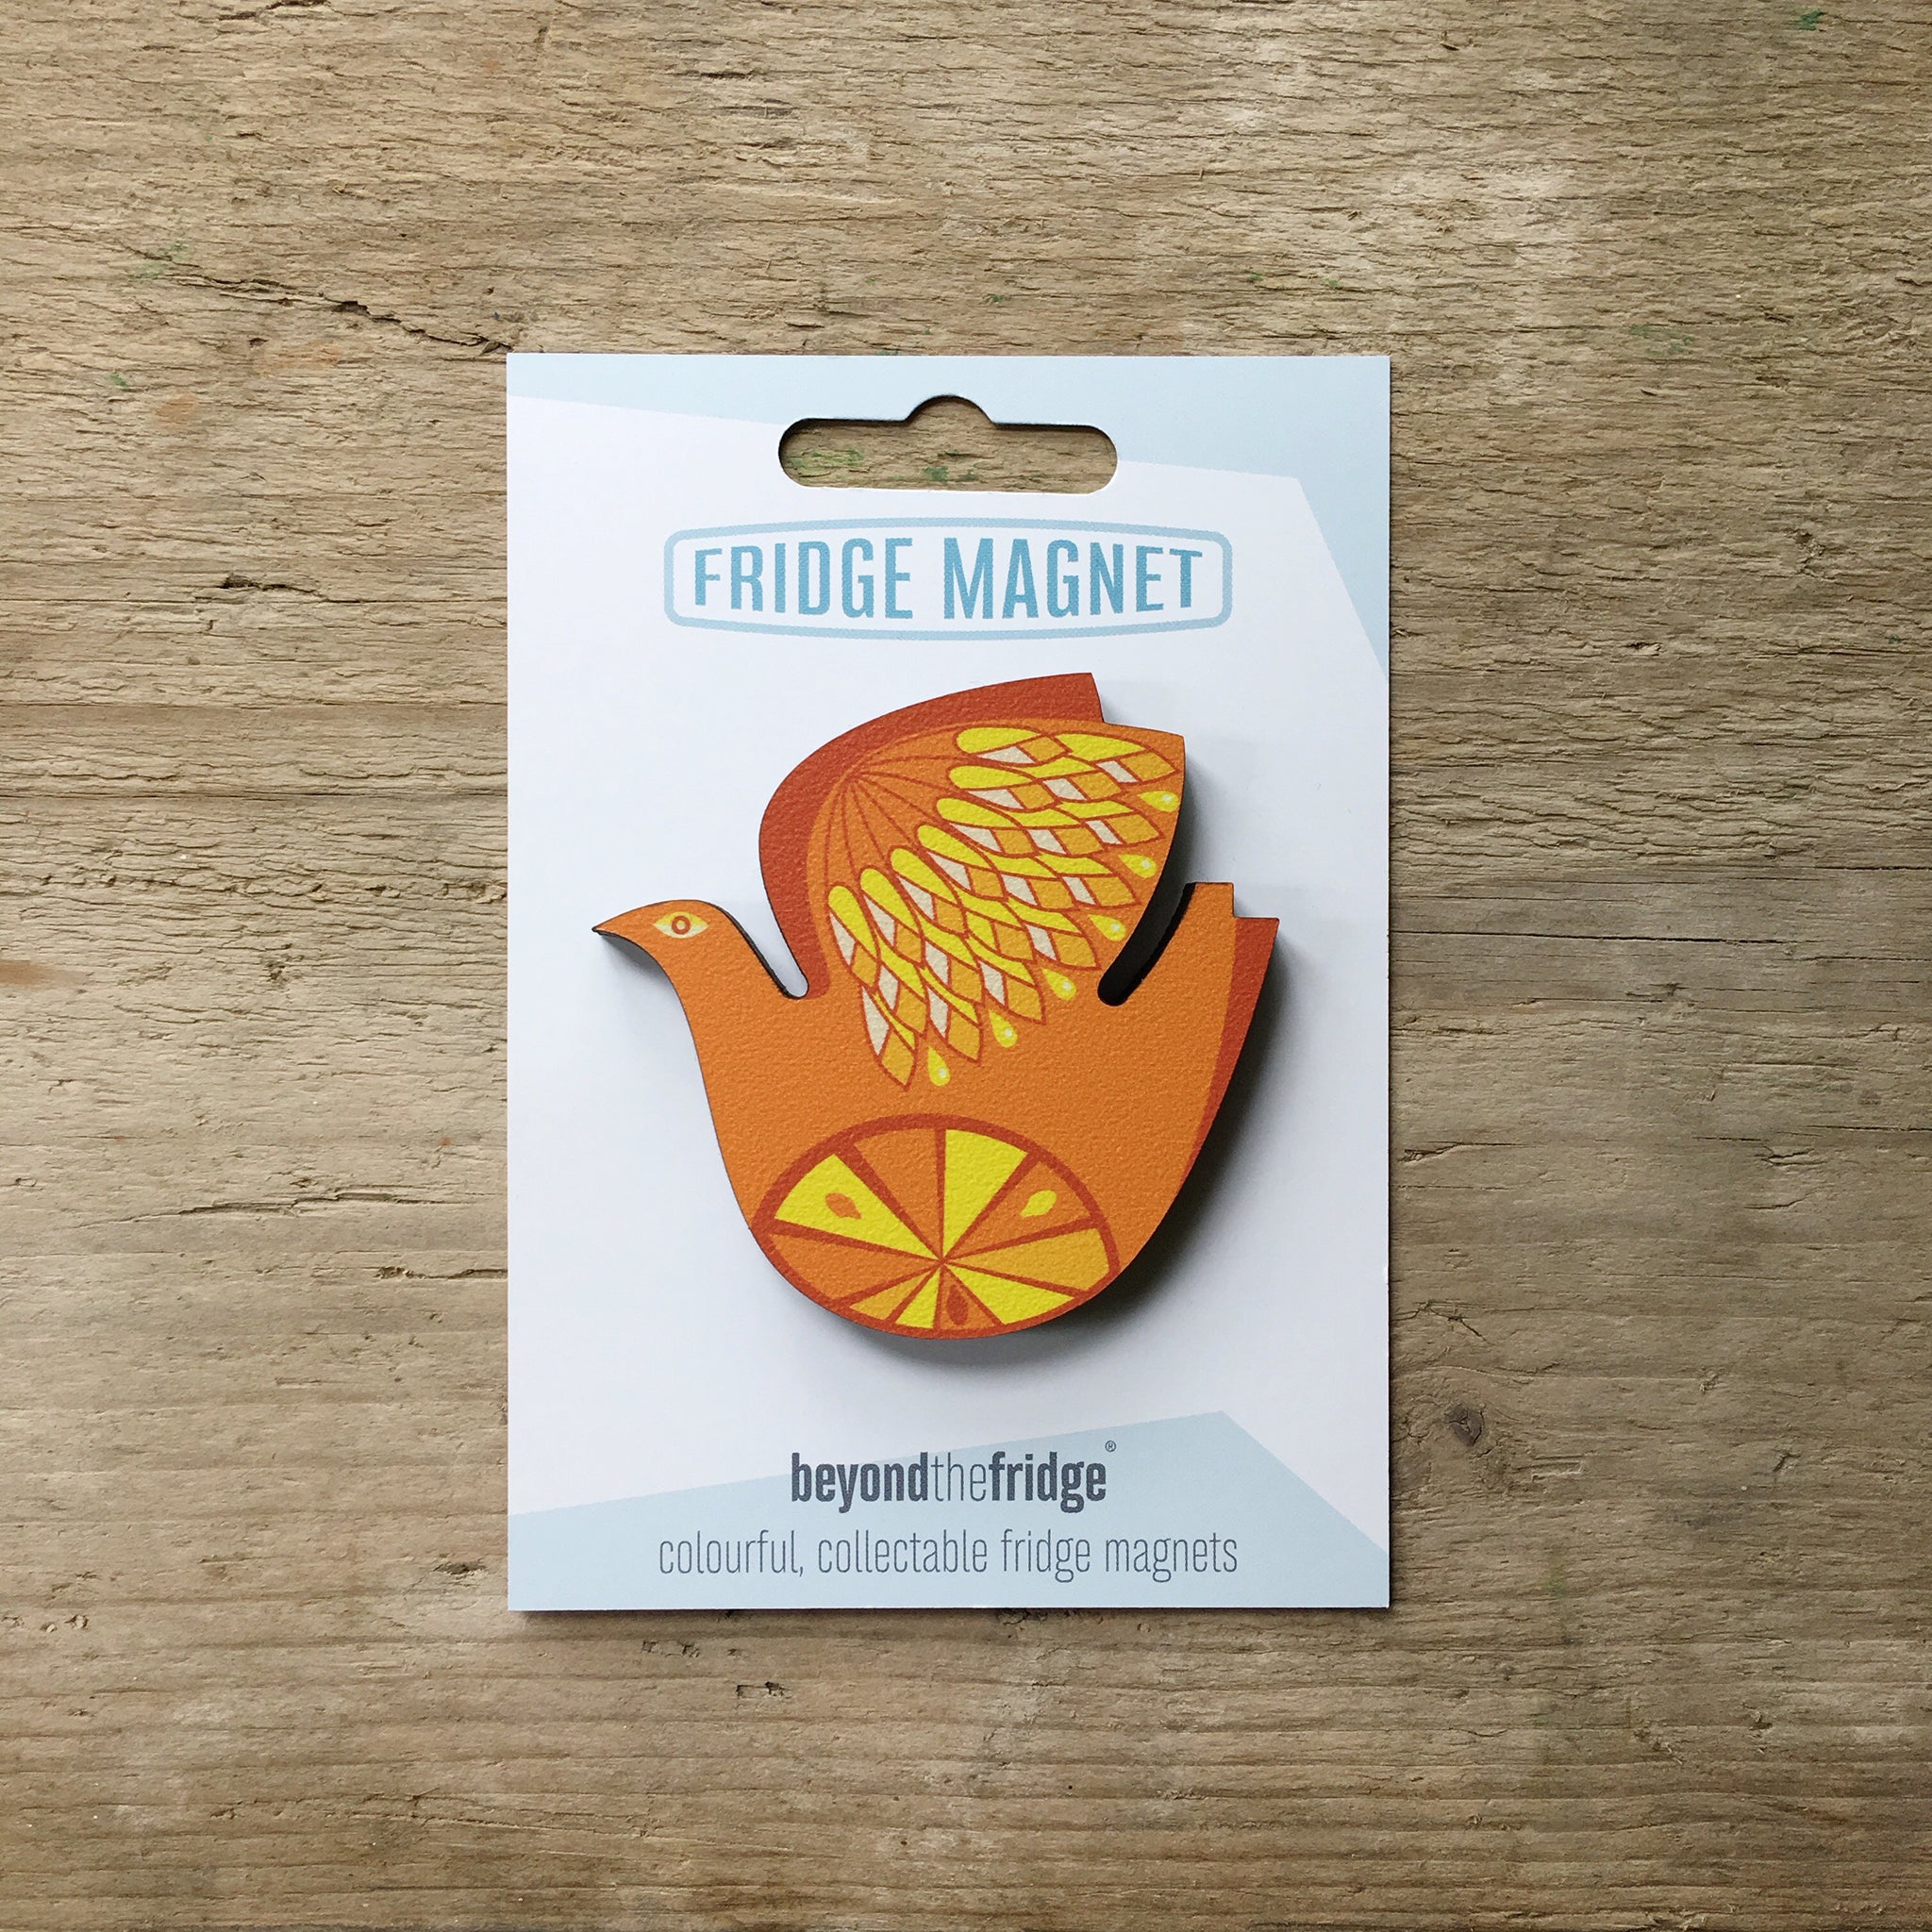 A retro citrus bird orange and lemon design plywood fridge magnet by Beyond the Fridge in it’s pack on a wooden background